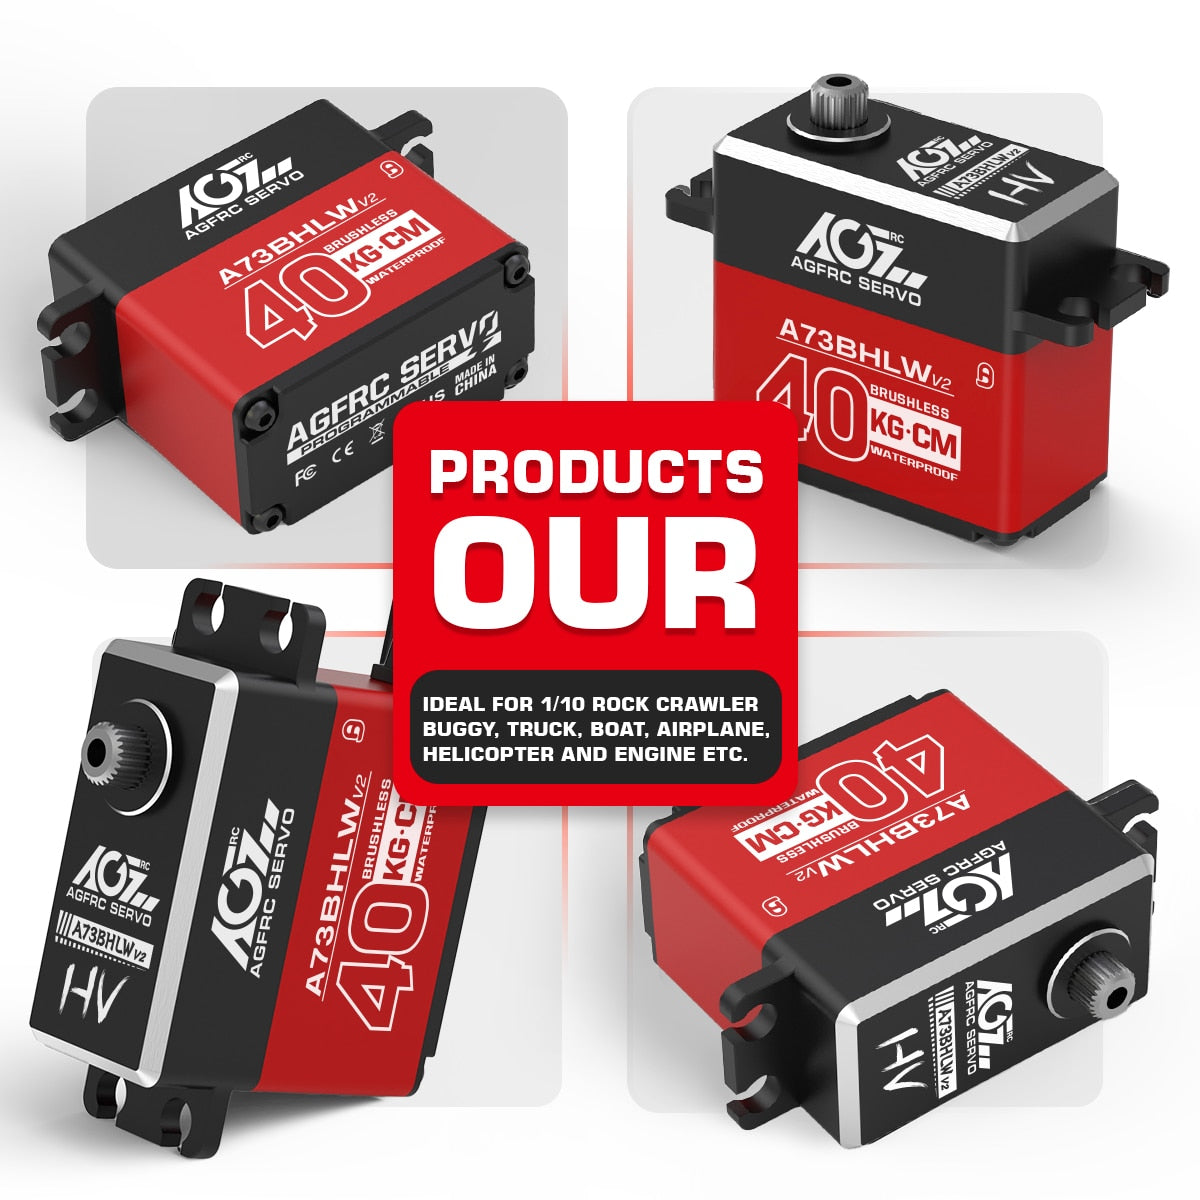 AGFRC A73BHLW V2 Servo, ce fG PRODUCTS OUR IDEAL FOR 1/10 ROCK 